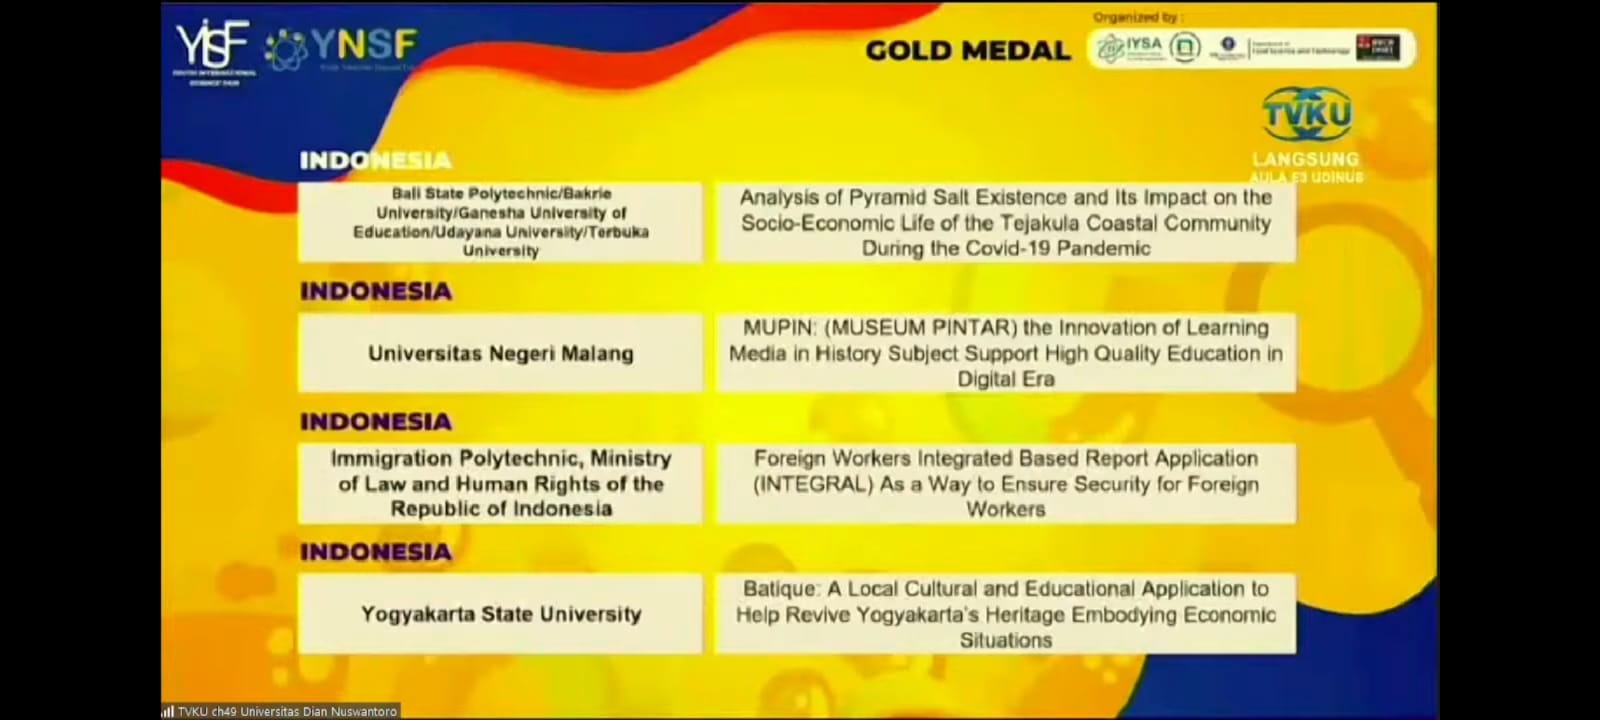 Ni Luh Gede Wiradani, Food Technology Student at FTP Udayana University Won a Gold Medal for 2 Years in a row in an International Event